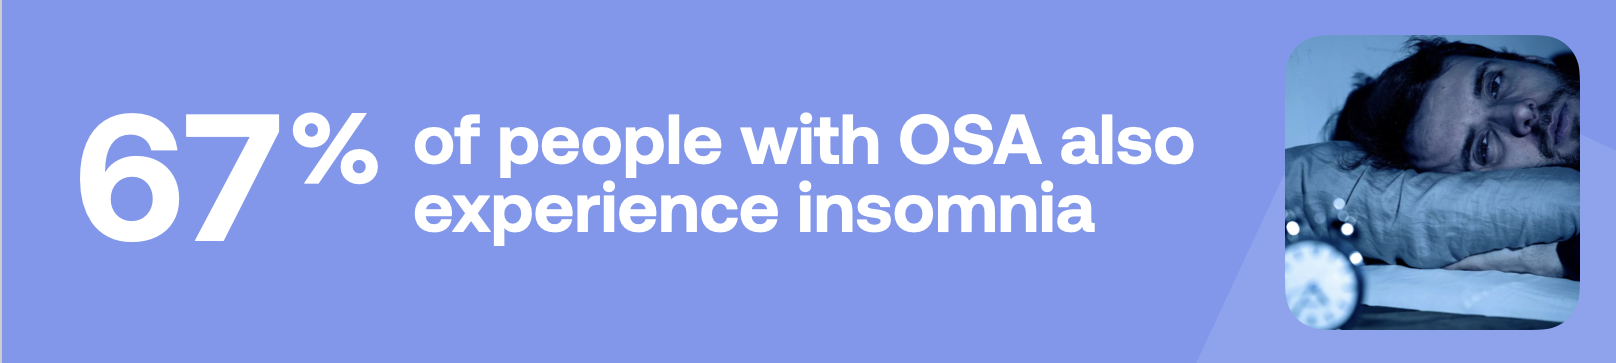 67% of people with OSA also experience insomnia